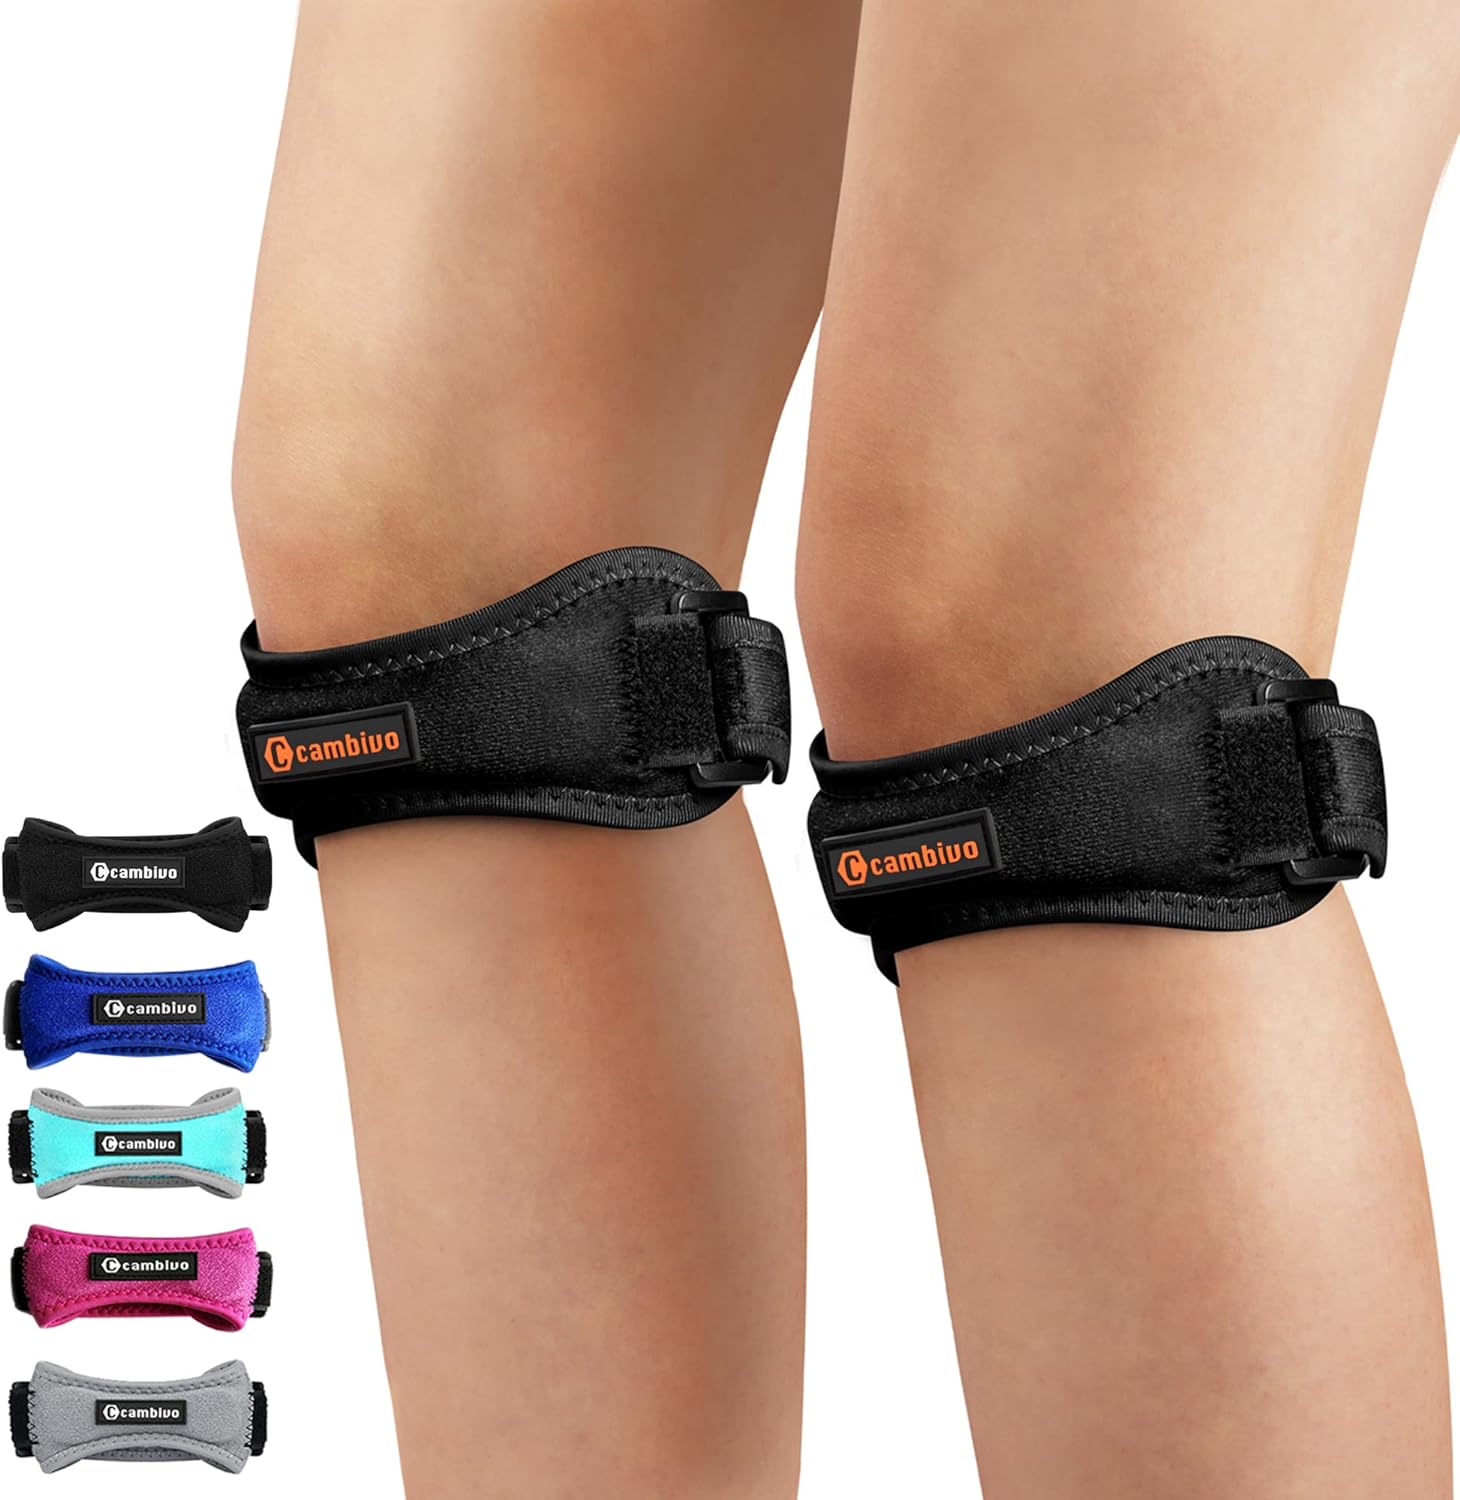 Patella Knee Support Strap Review